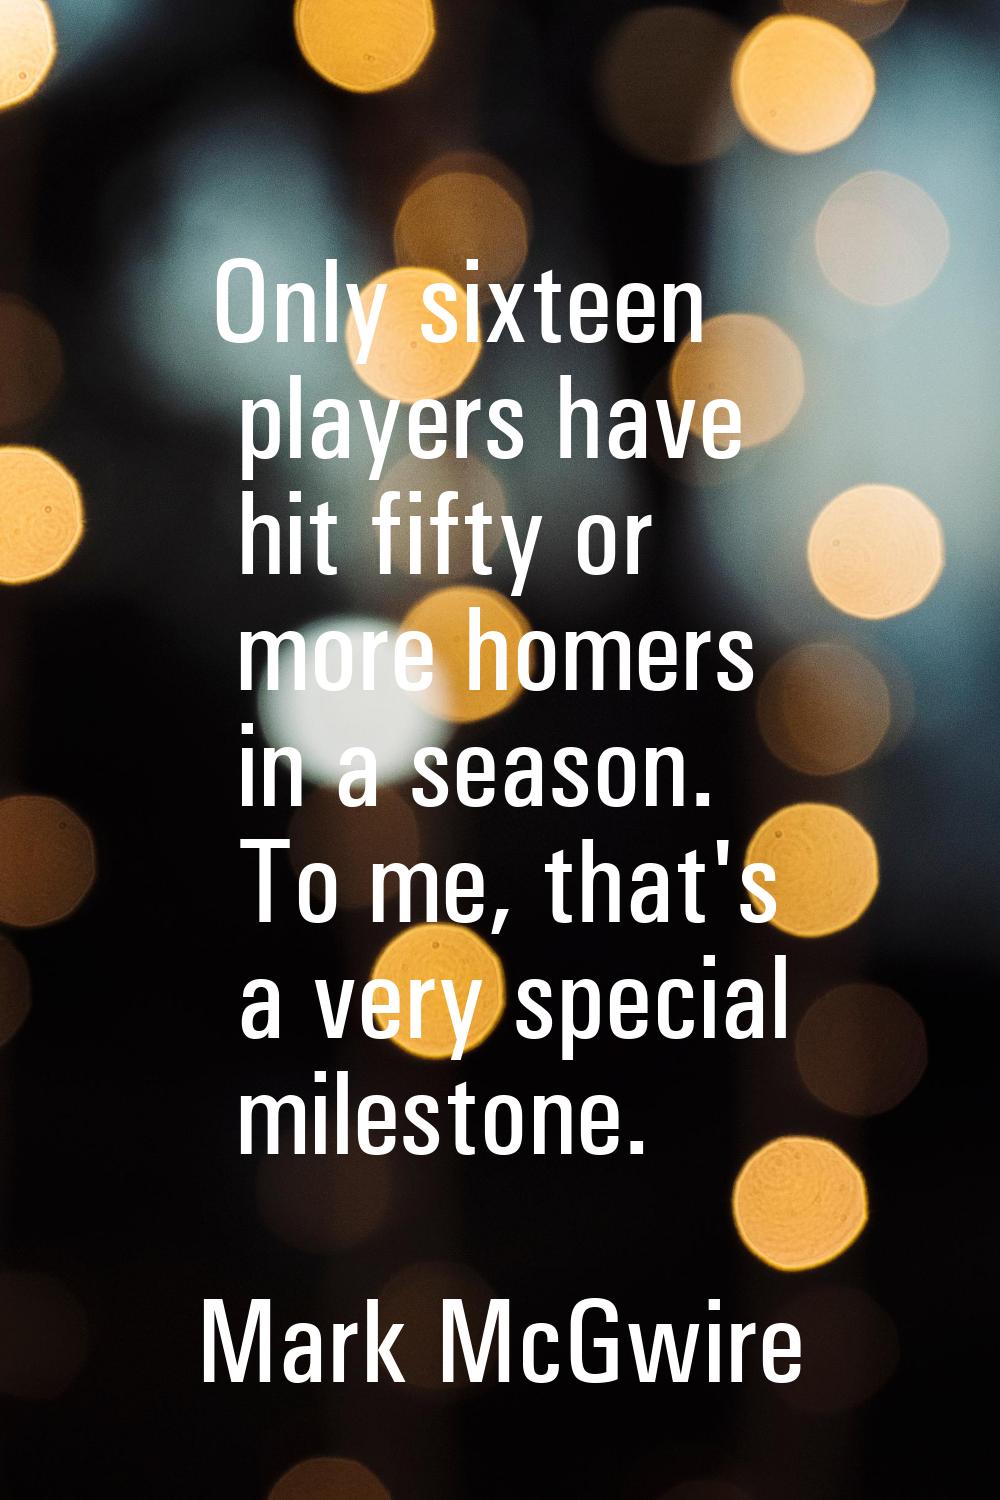 Only sixteen players have hit fifty or more homers in a season. To me, that's a very special milest